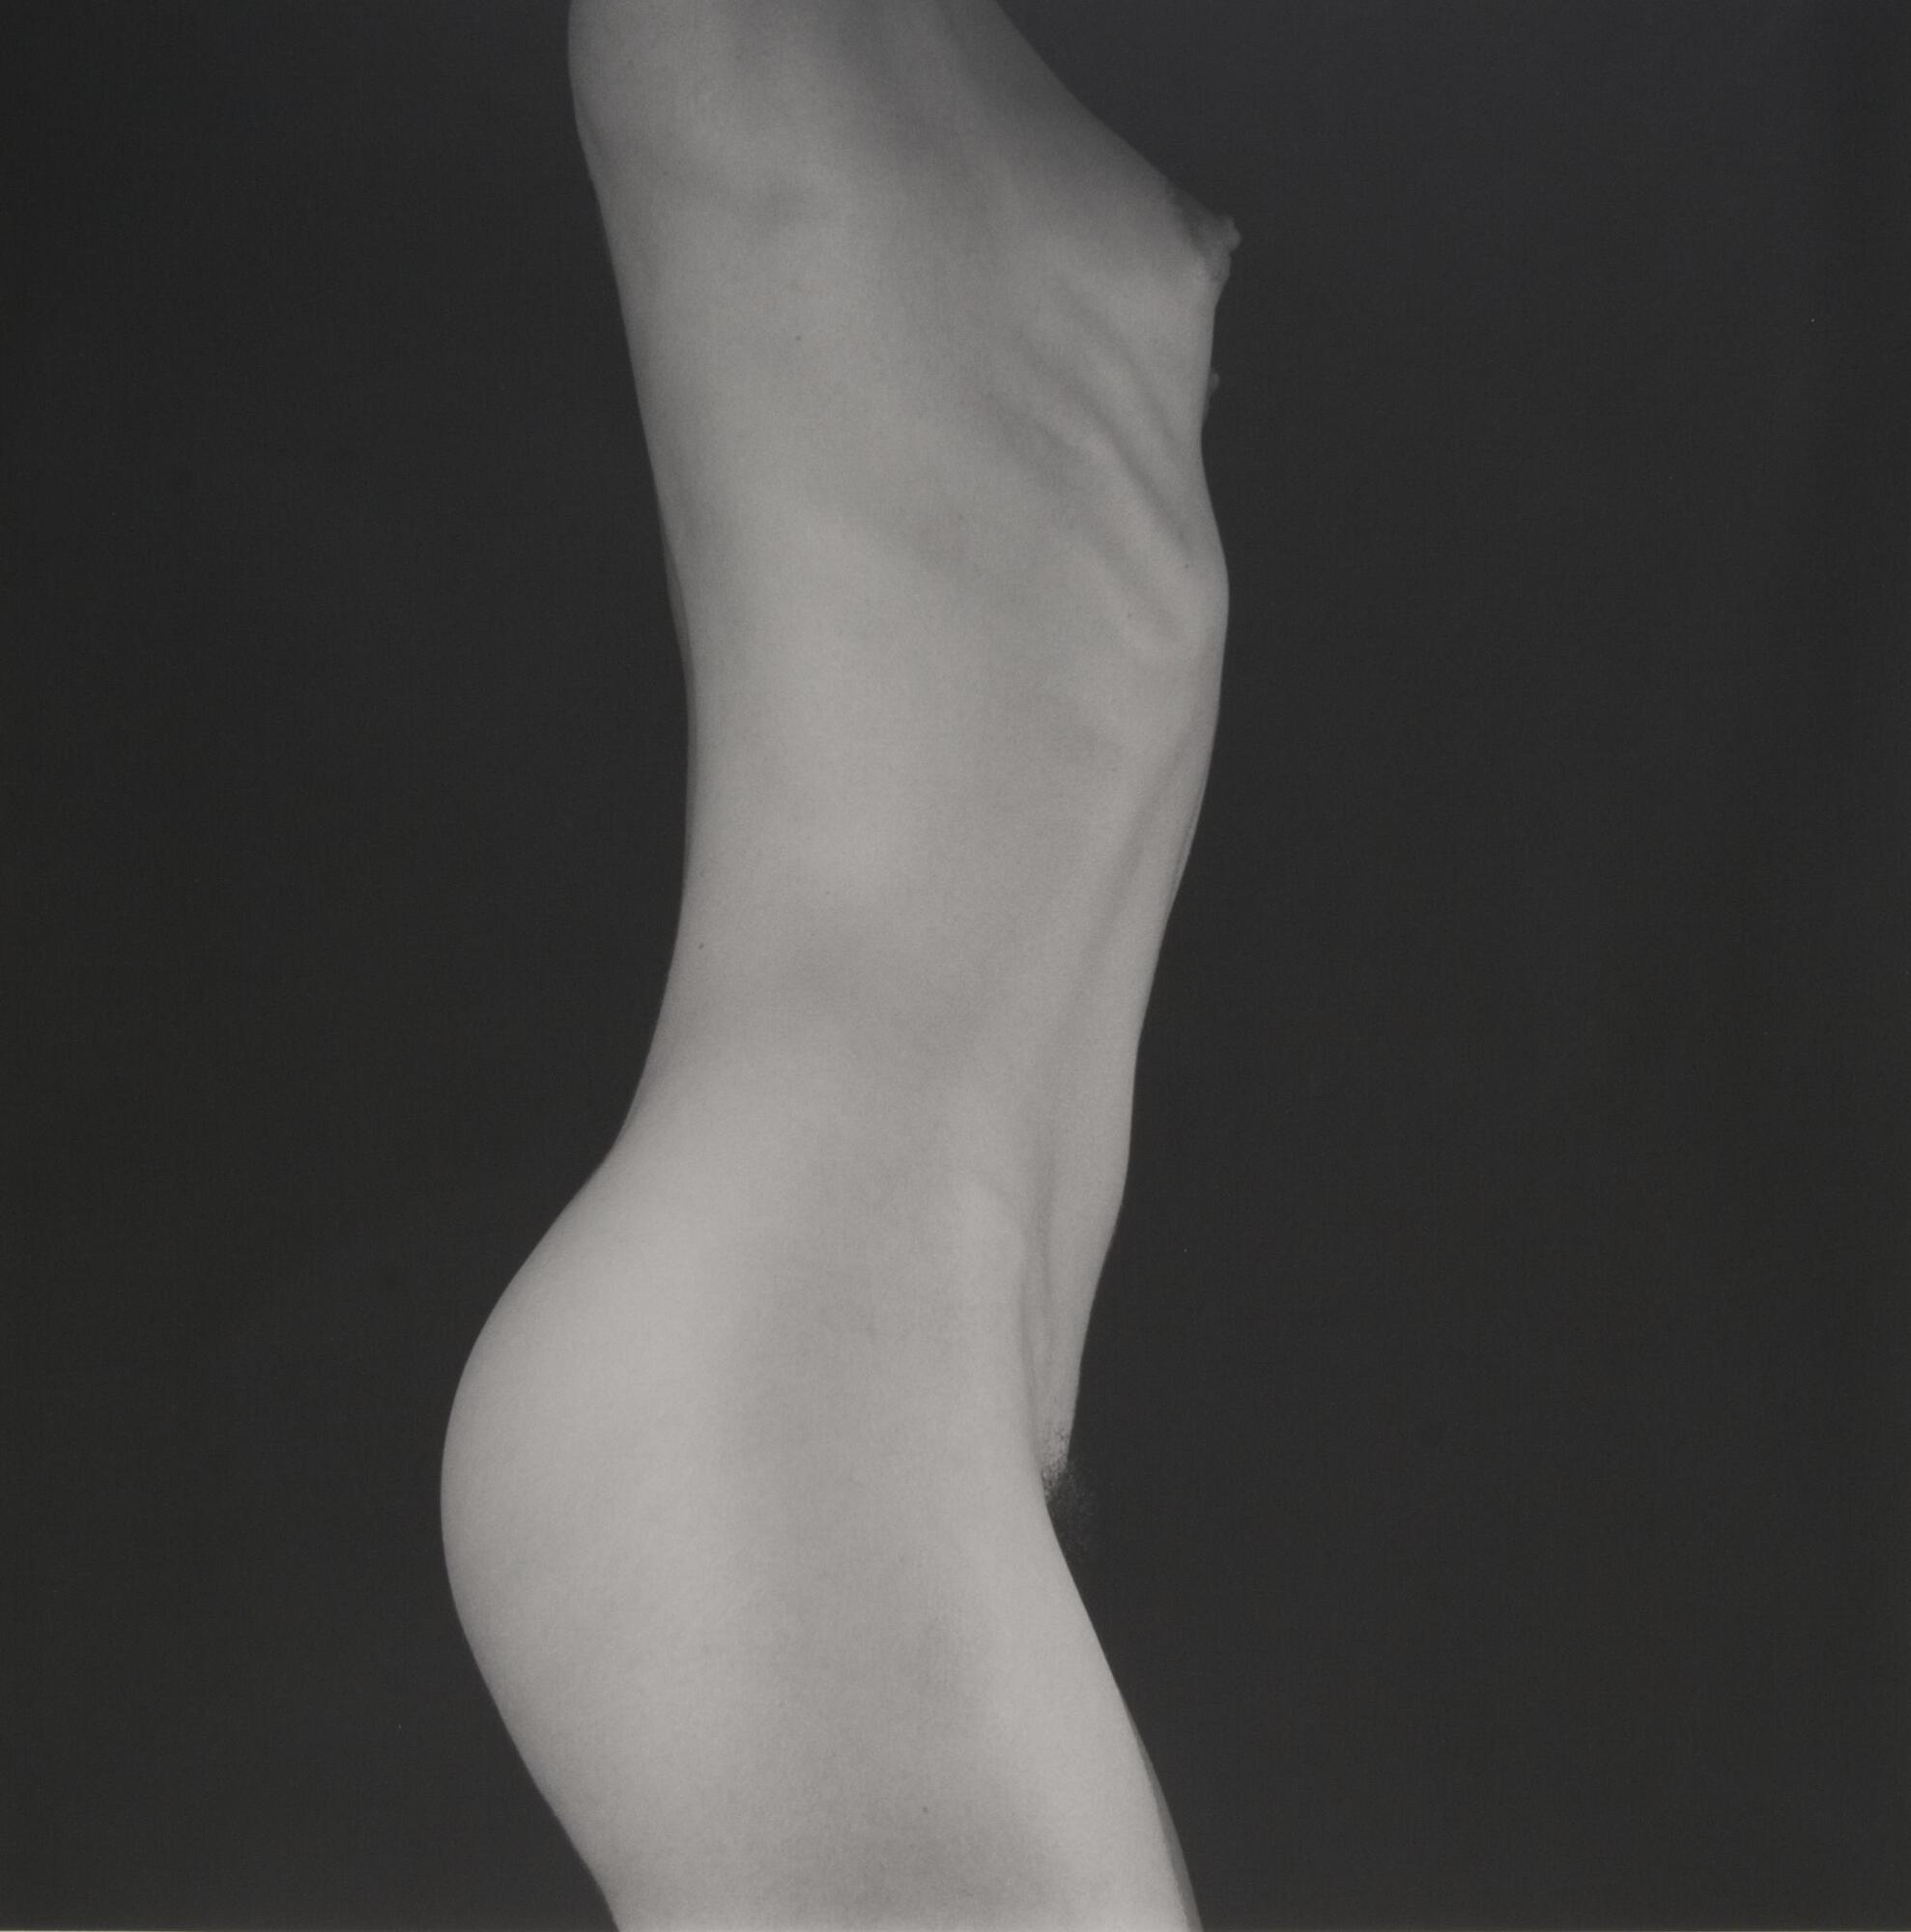 A nude female torso. The photograph is of a woman's torso from her right side against a black background. The composition of the photo is from her shoulders to her upper thigh, with her arms extended upwards and out of frame.